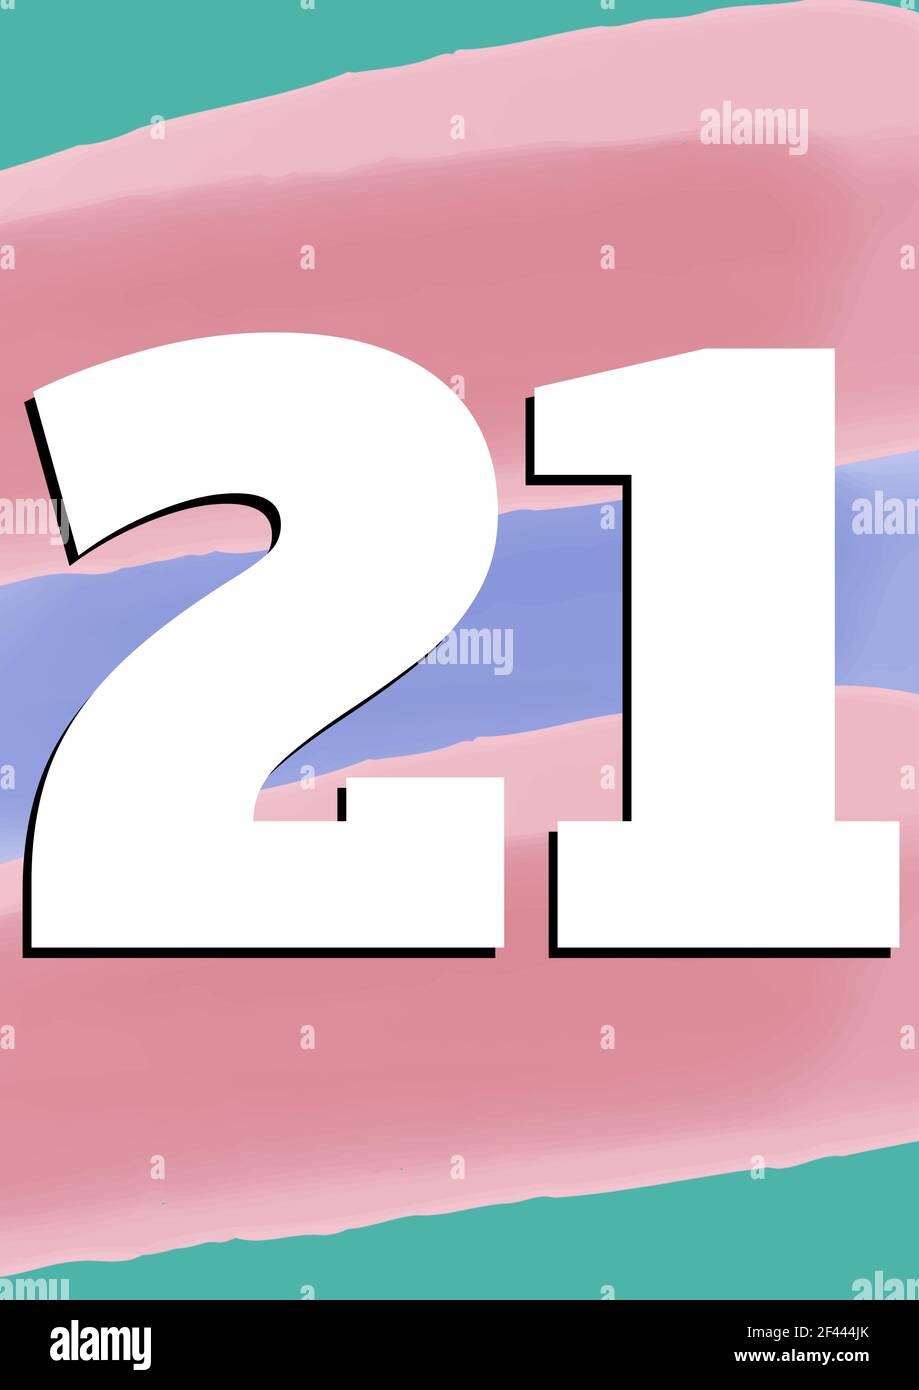 Digitally generated image of 21 number text against multicolor background Stock Photo